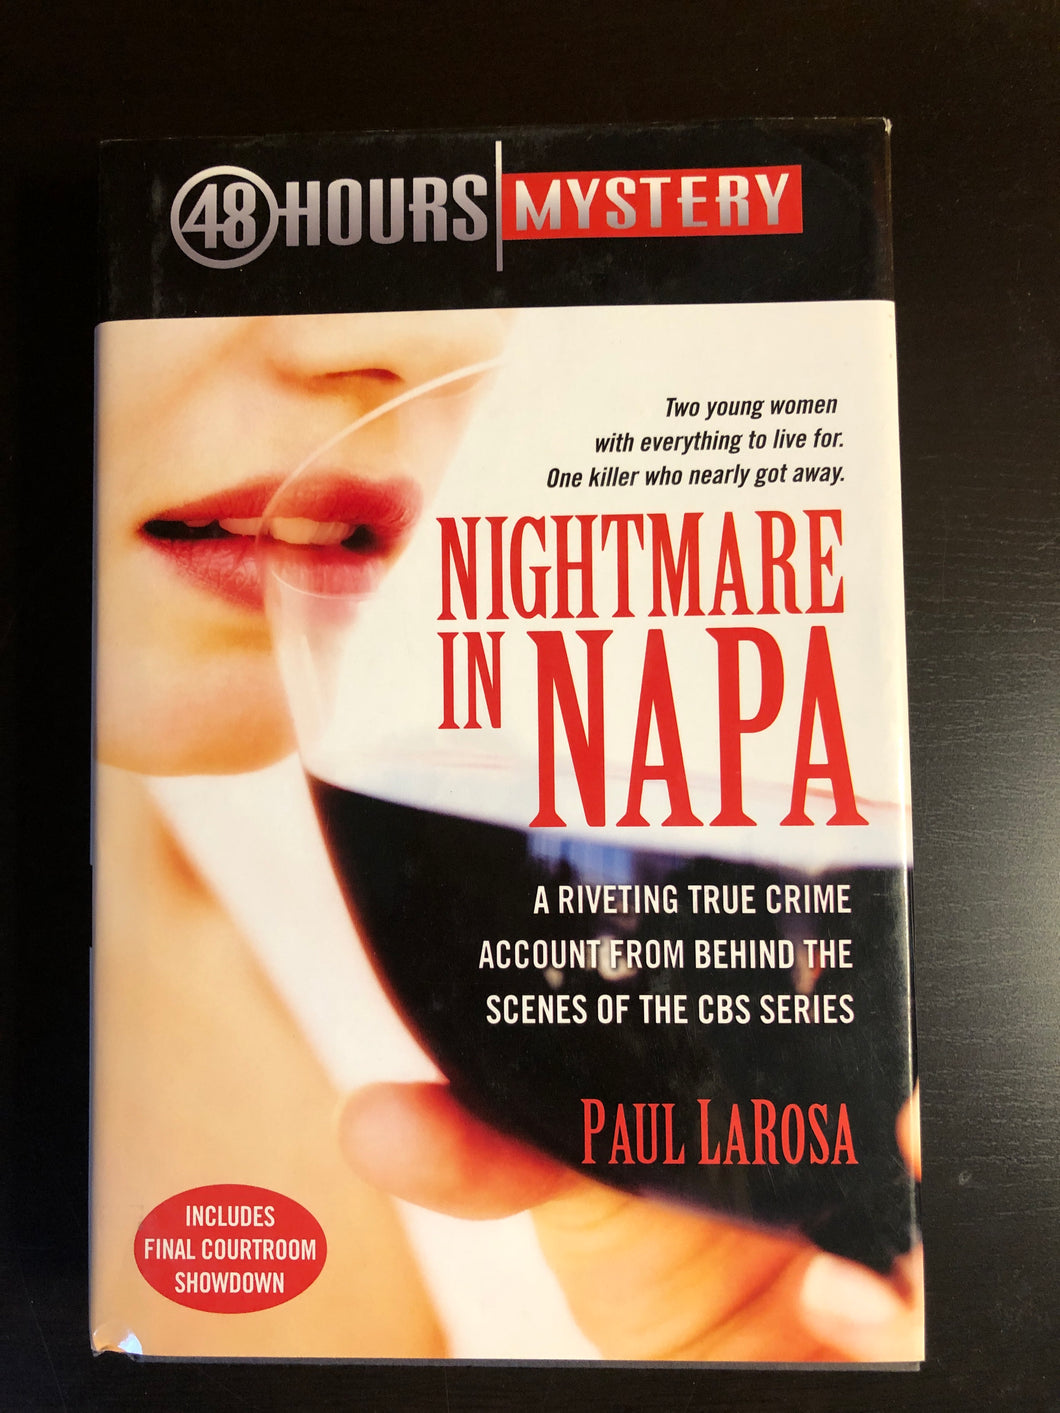 Nightmare in Napa: A Riveting True Crime Account from Behind the Scenes of the CBS Series